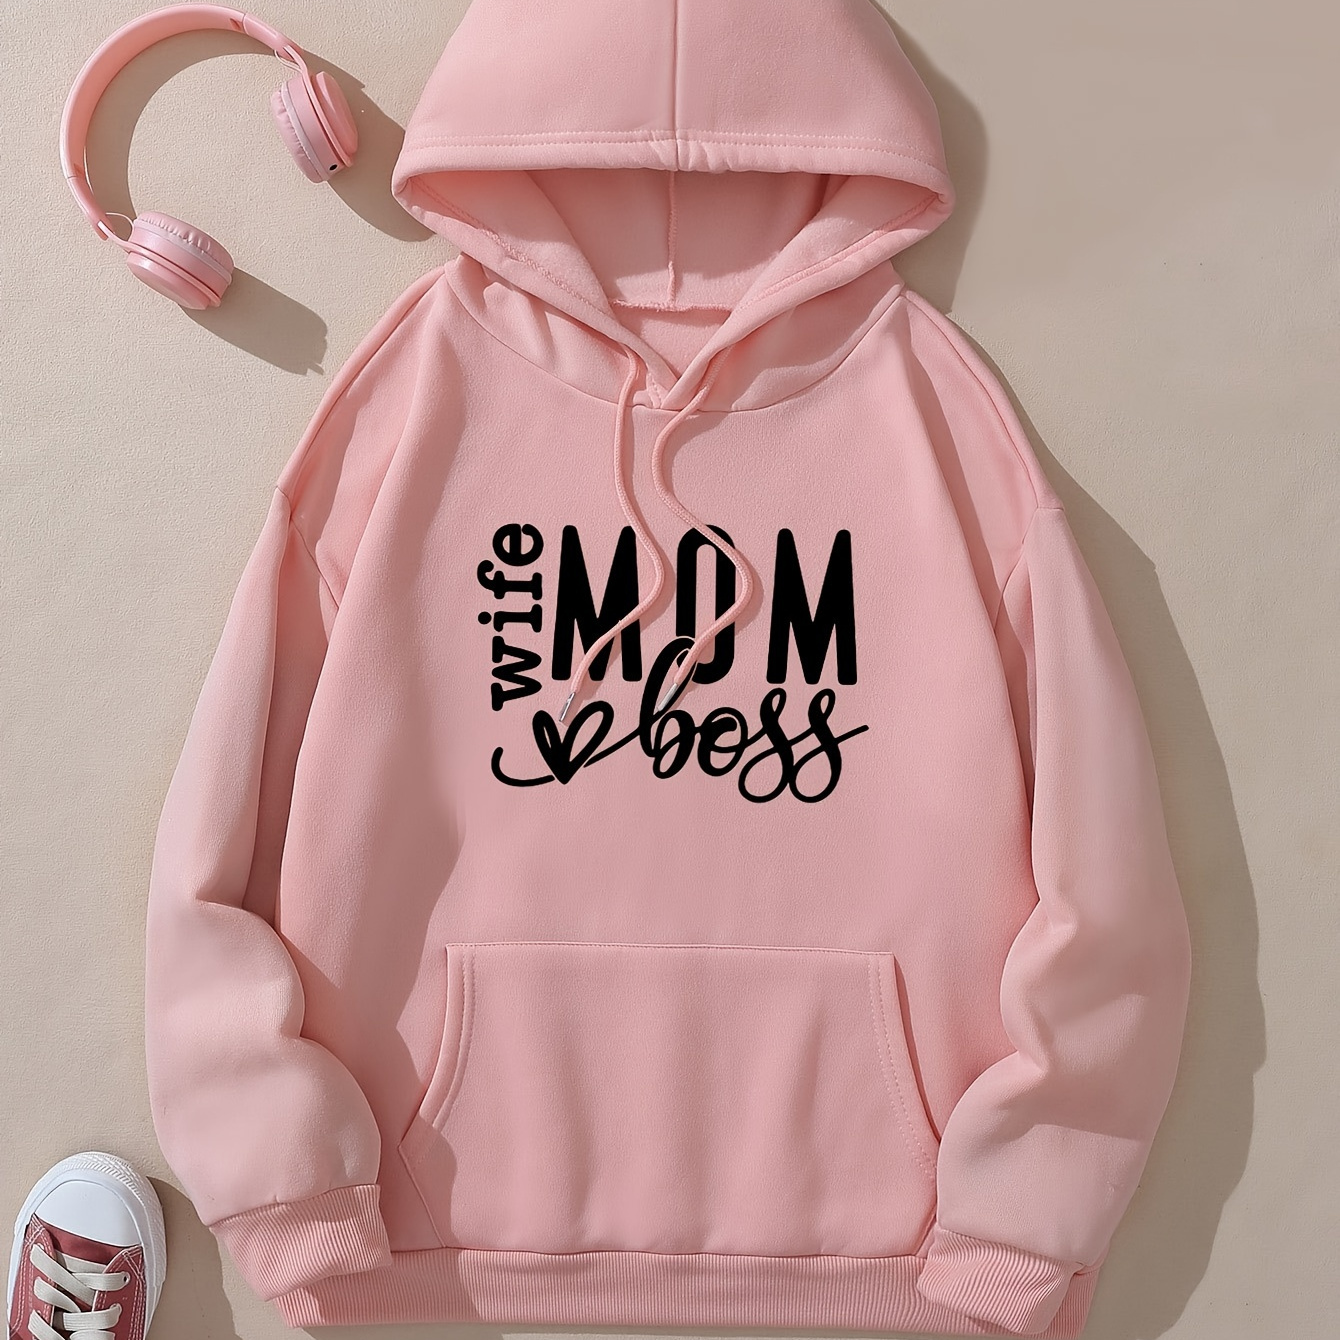 

Wife Mom Boss Letter Print Hoodie, Drawstring Casual Hooded Sweatshirt For Fall & Spring, Women's Clothing